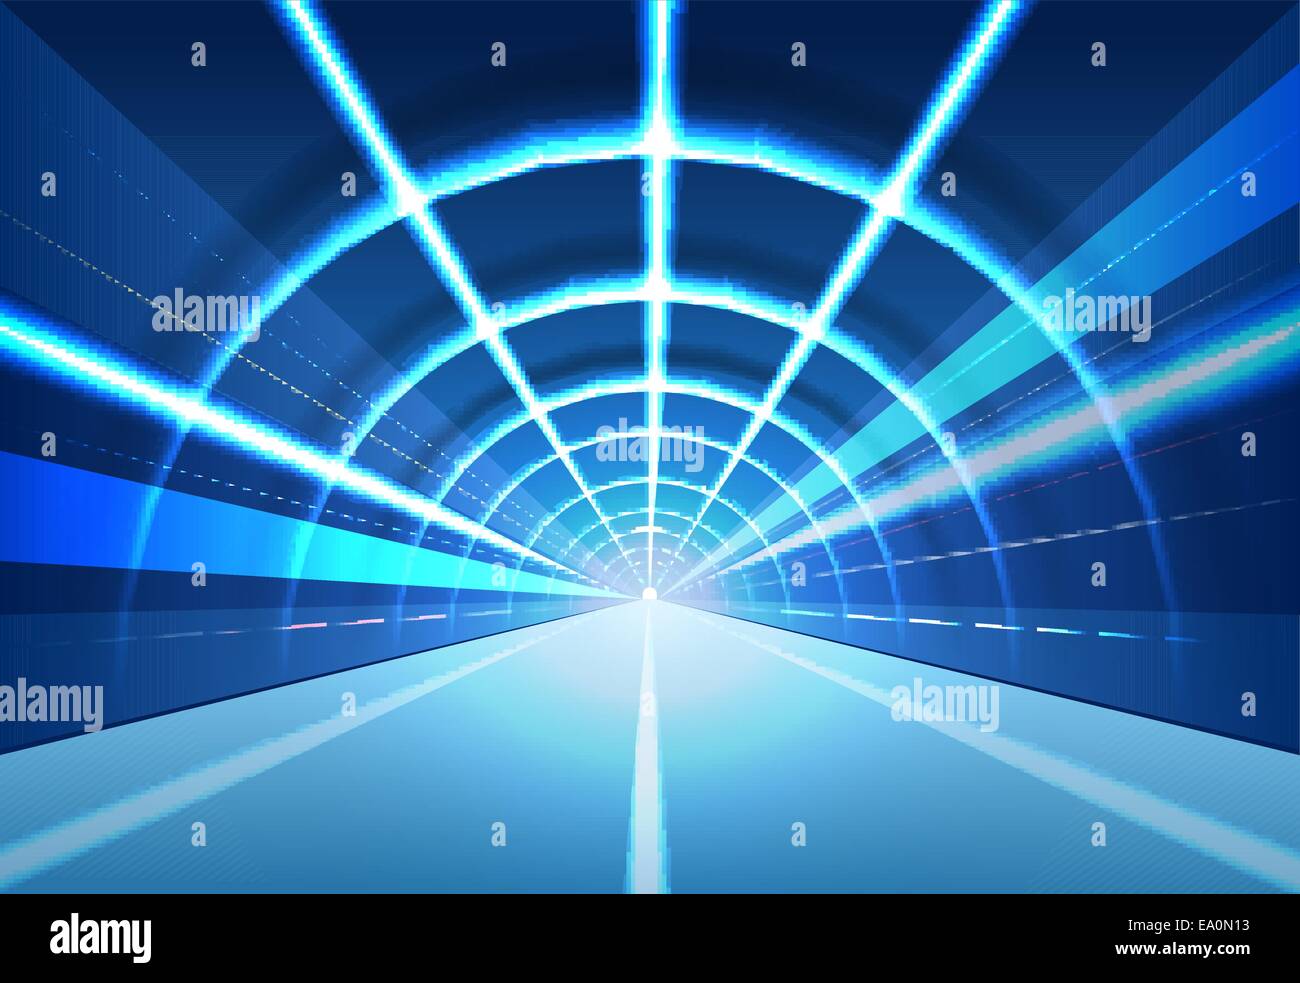 vector abstract tunnel illustration, eps10 file, gradient mesh and transparency used Stock Vector